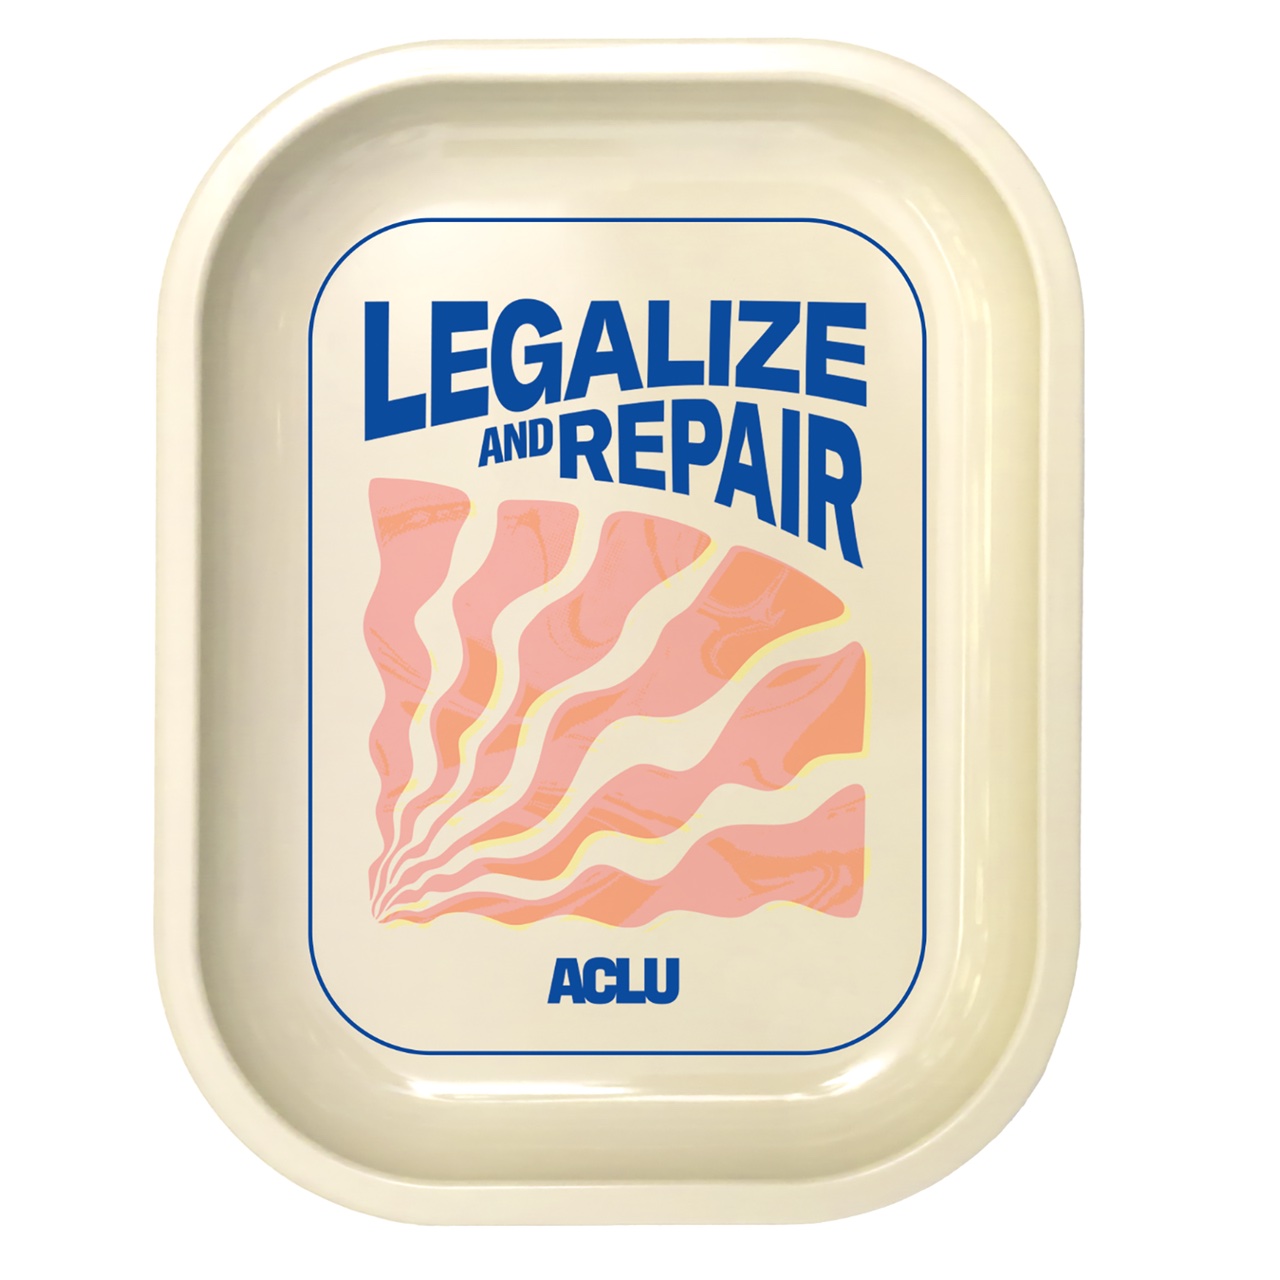 A picture of the Legalize and Repair Tray from the ACLU store.